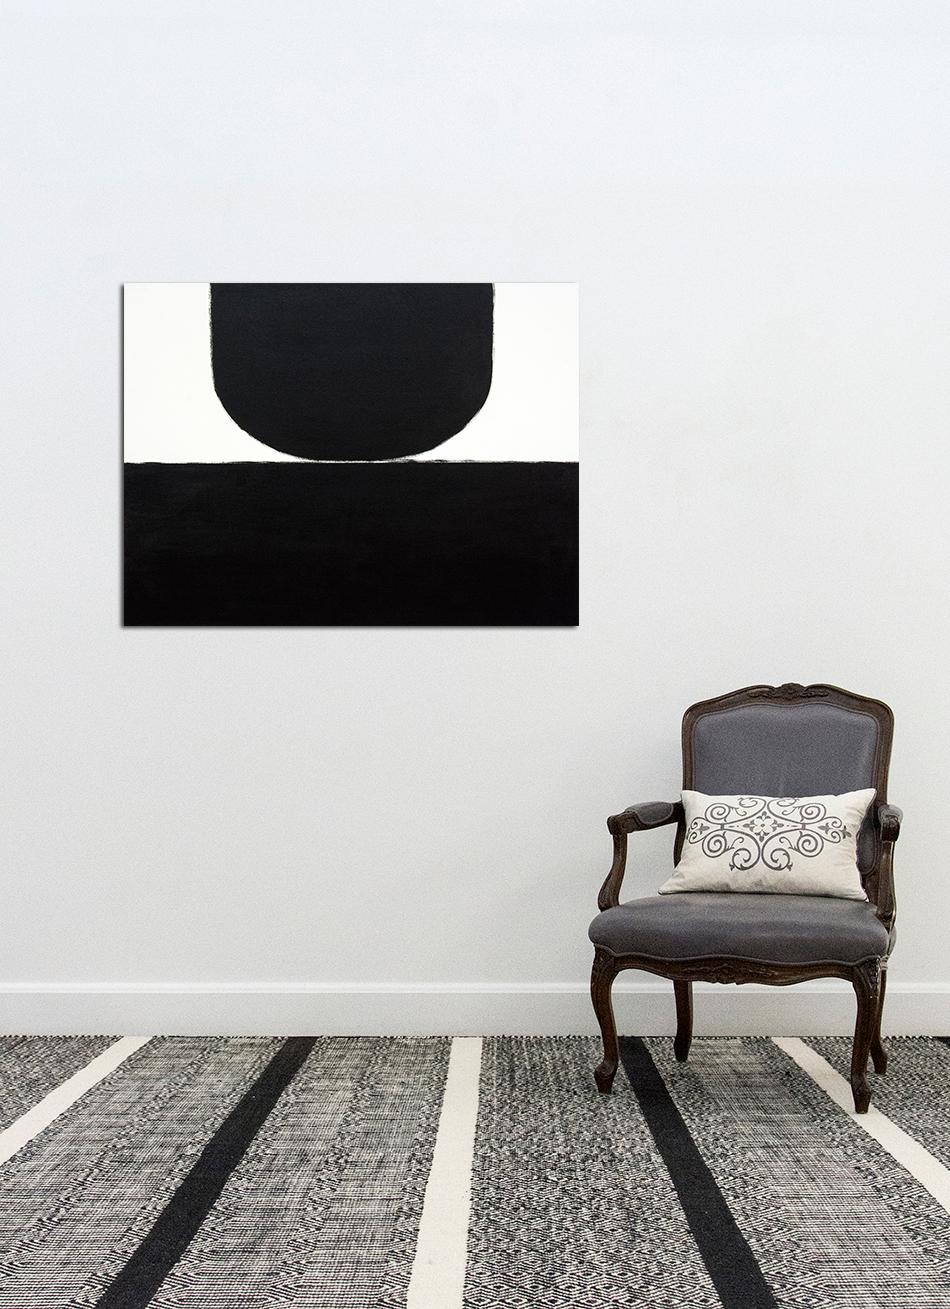 Horizon - Black Abstract Painting by Tim Forbes